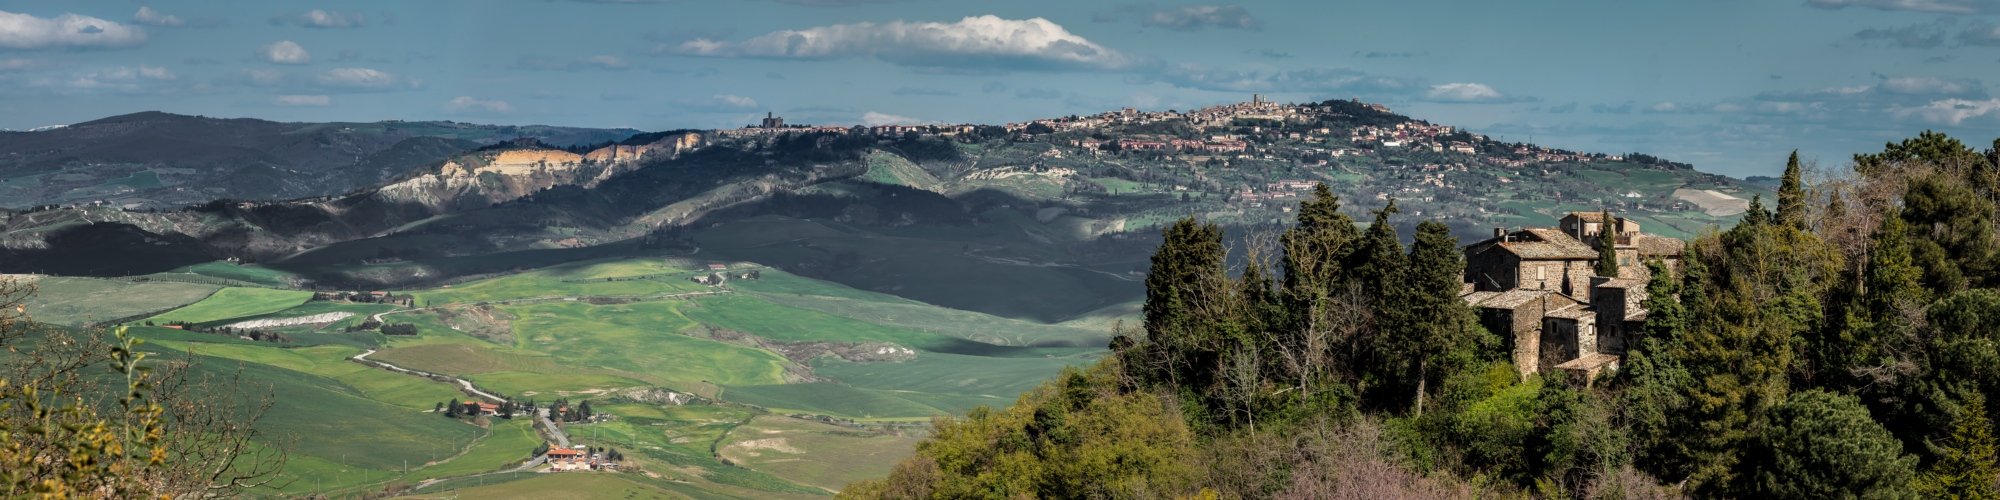 Volterra (in the distance) and its countryside